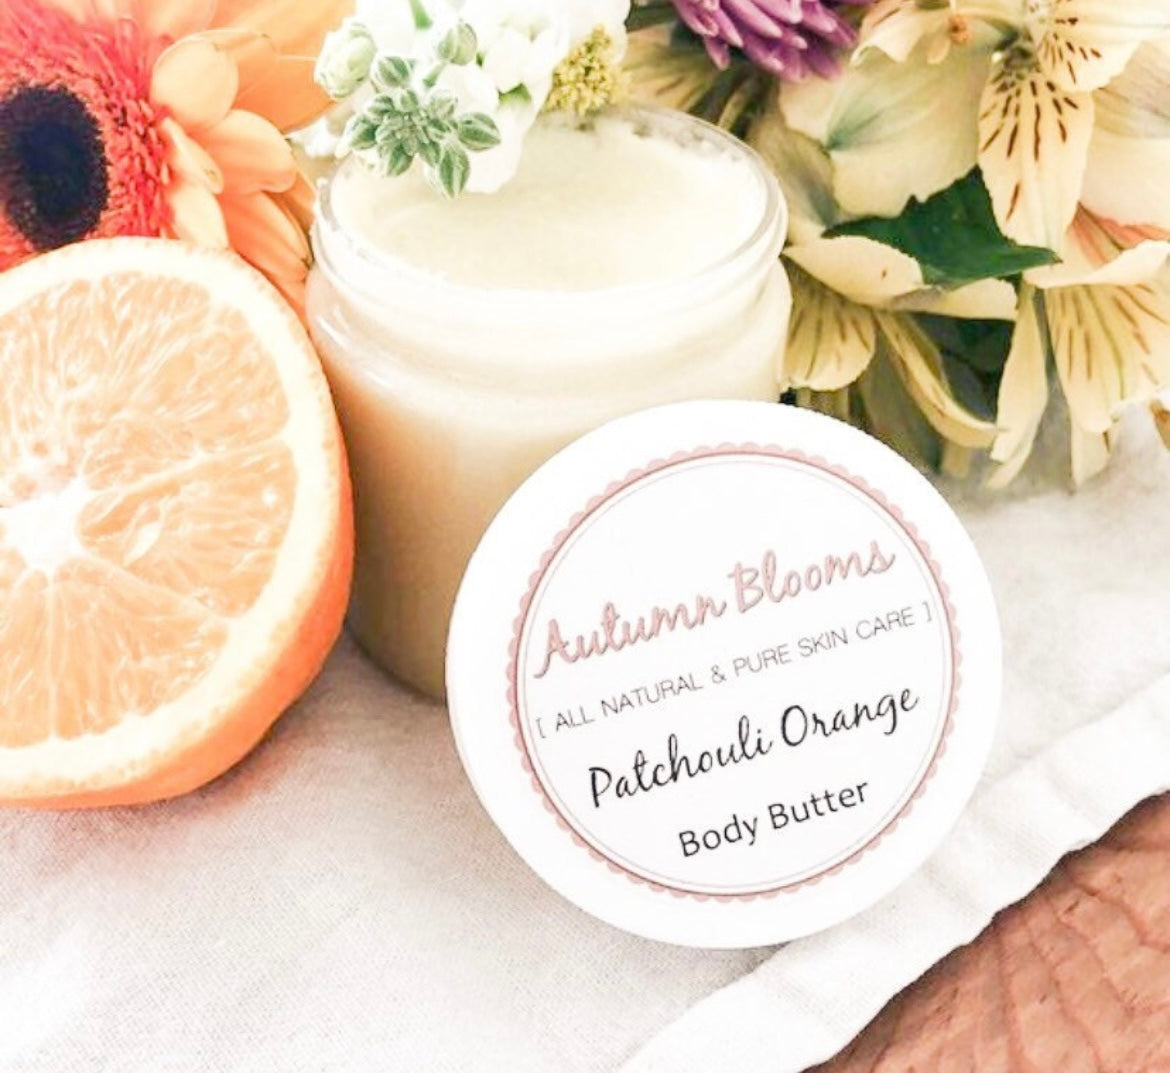 Patchouli Orange Body butter, Organic Body Butter, Gift for her